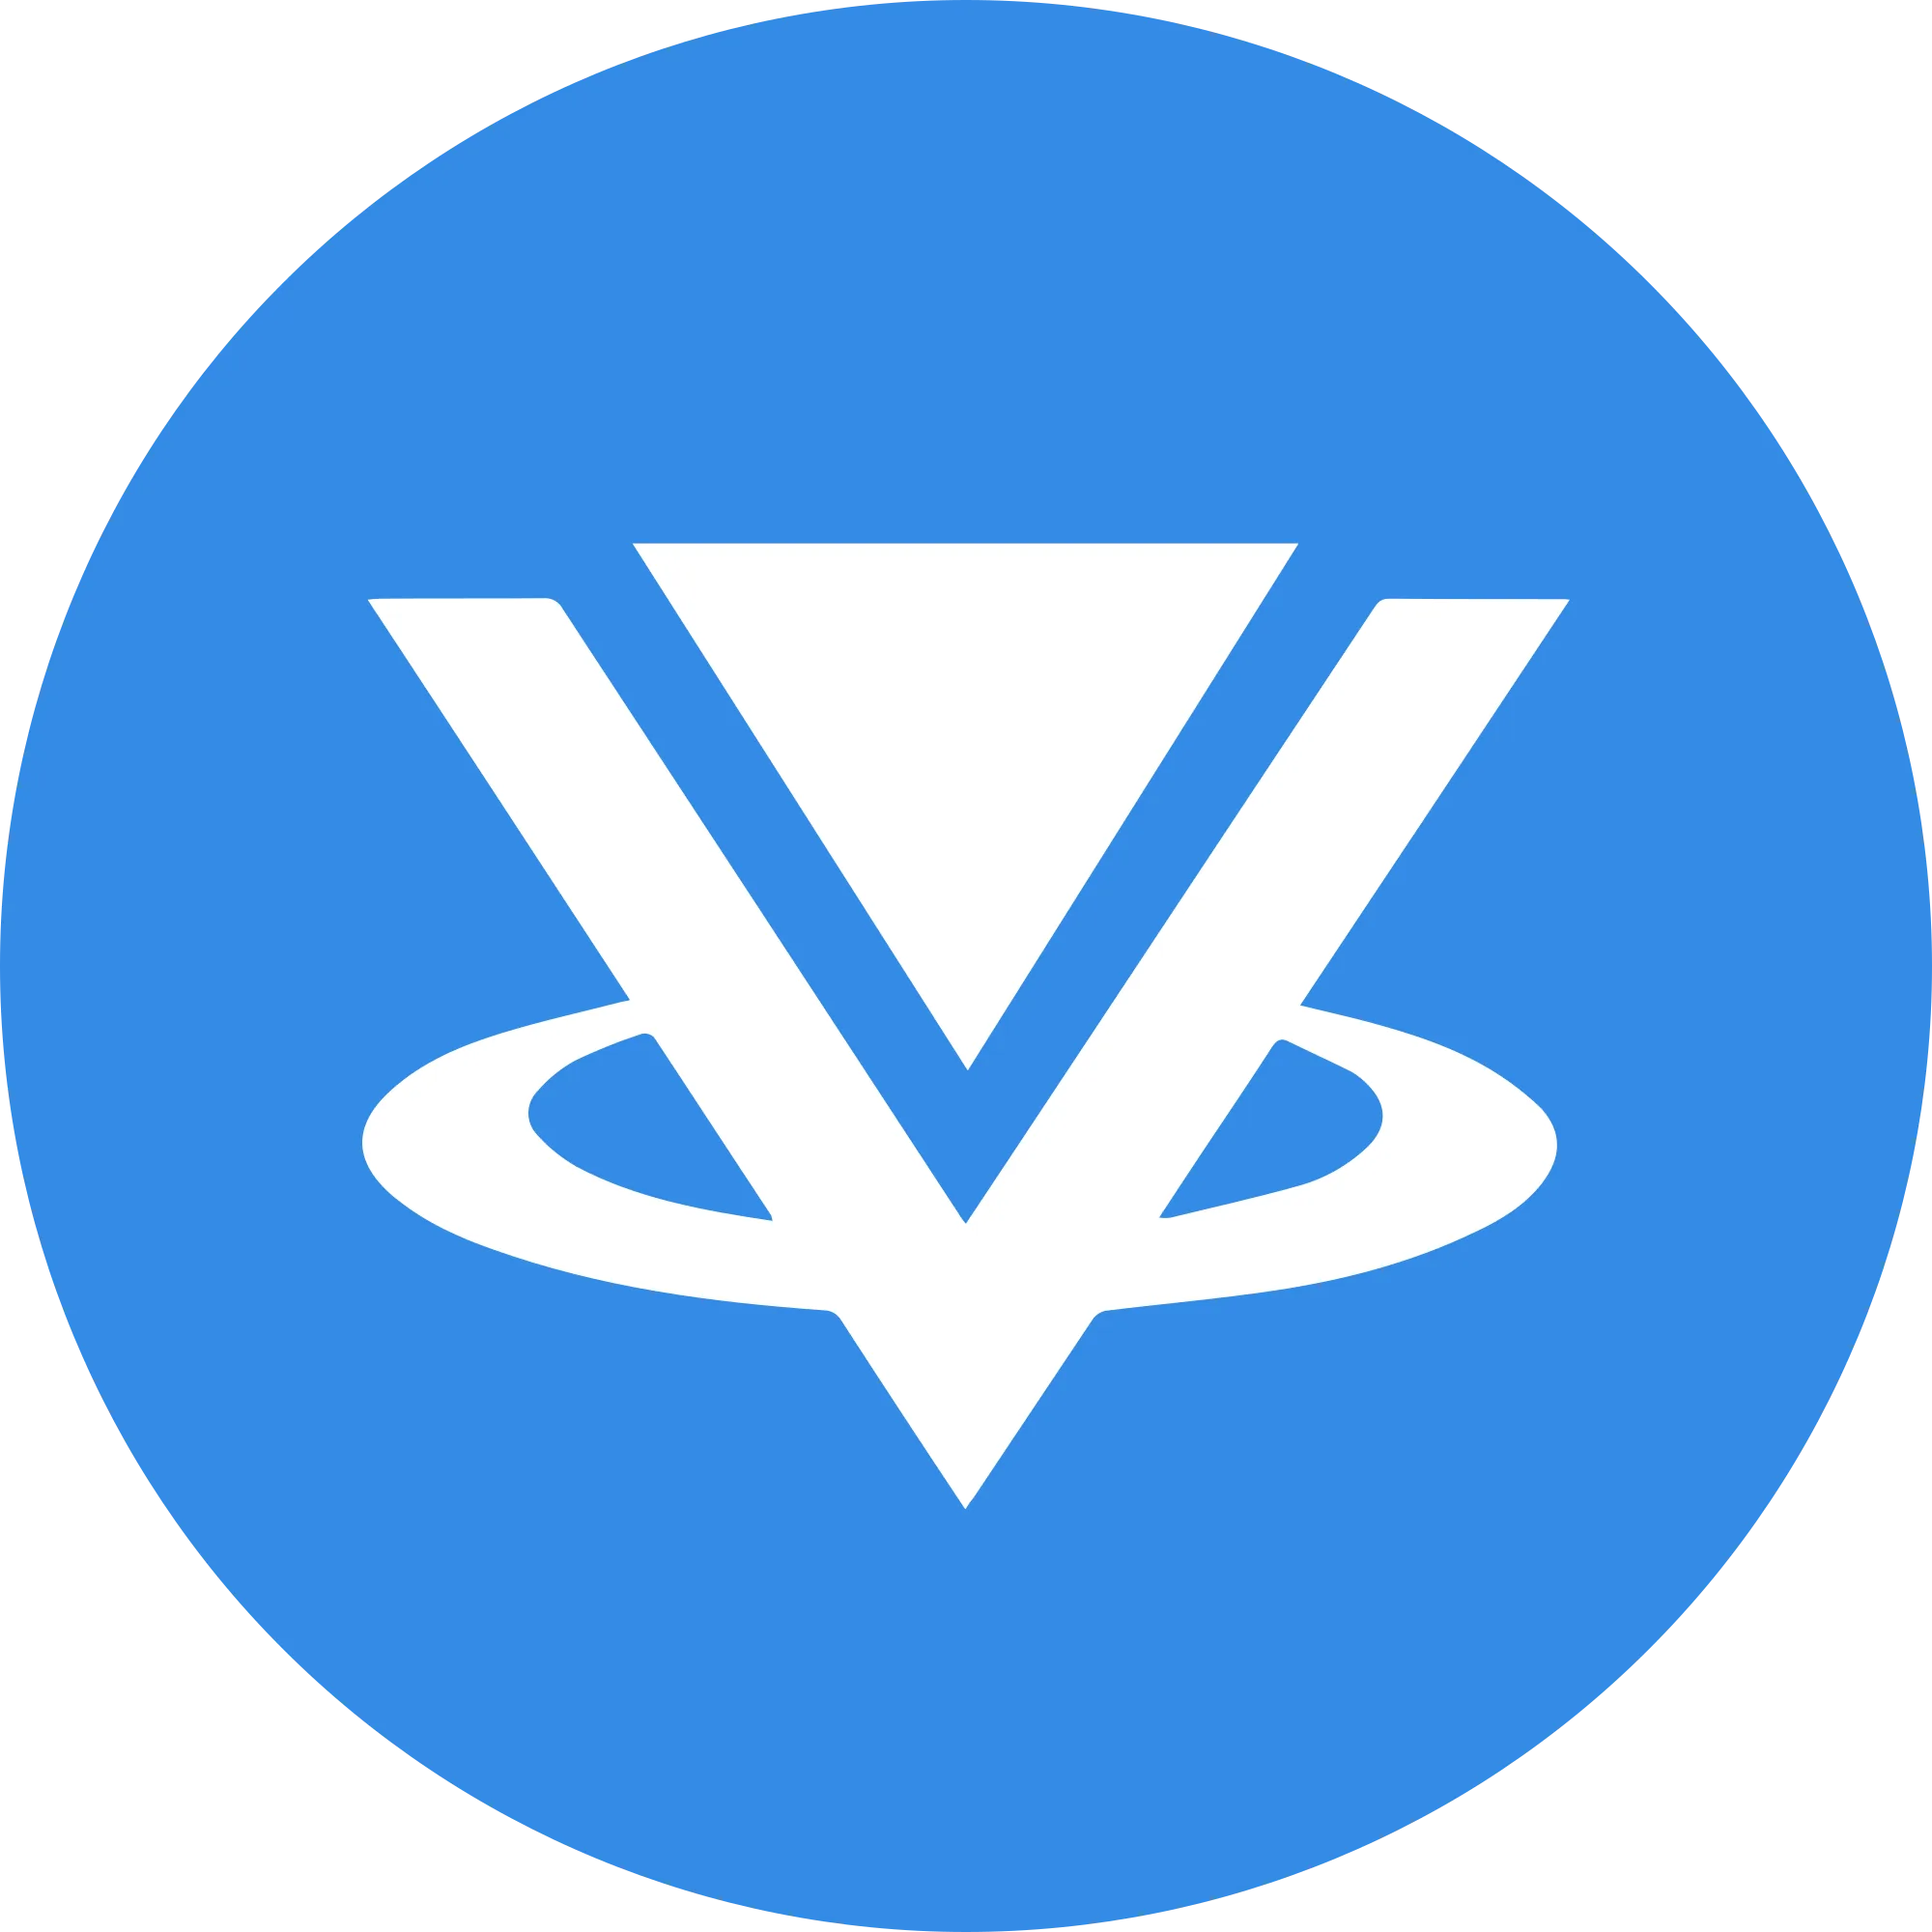 VIBE logo in png format